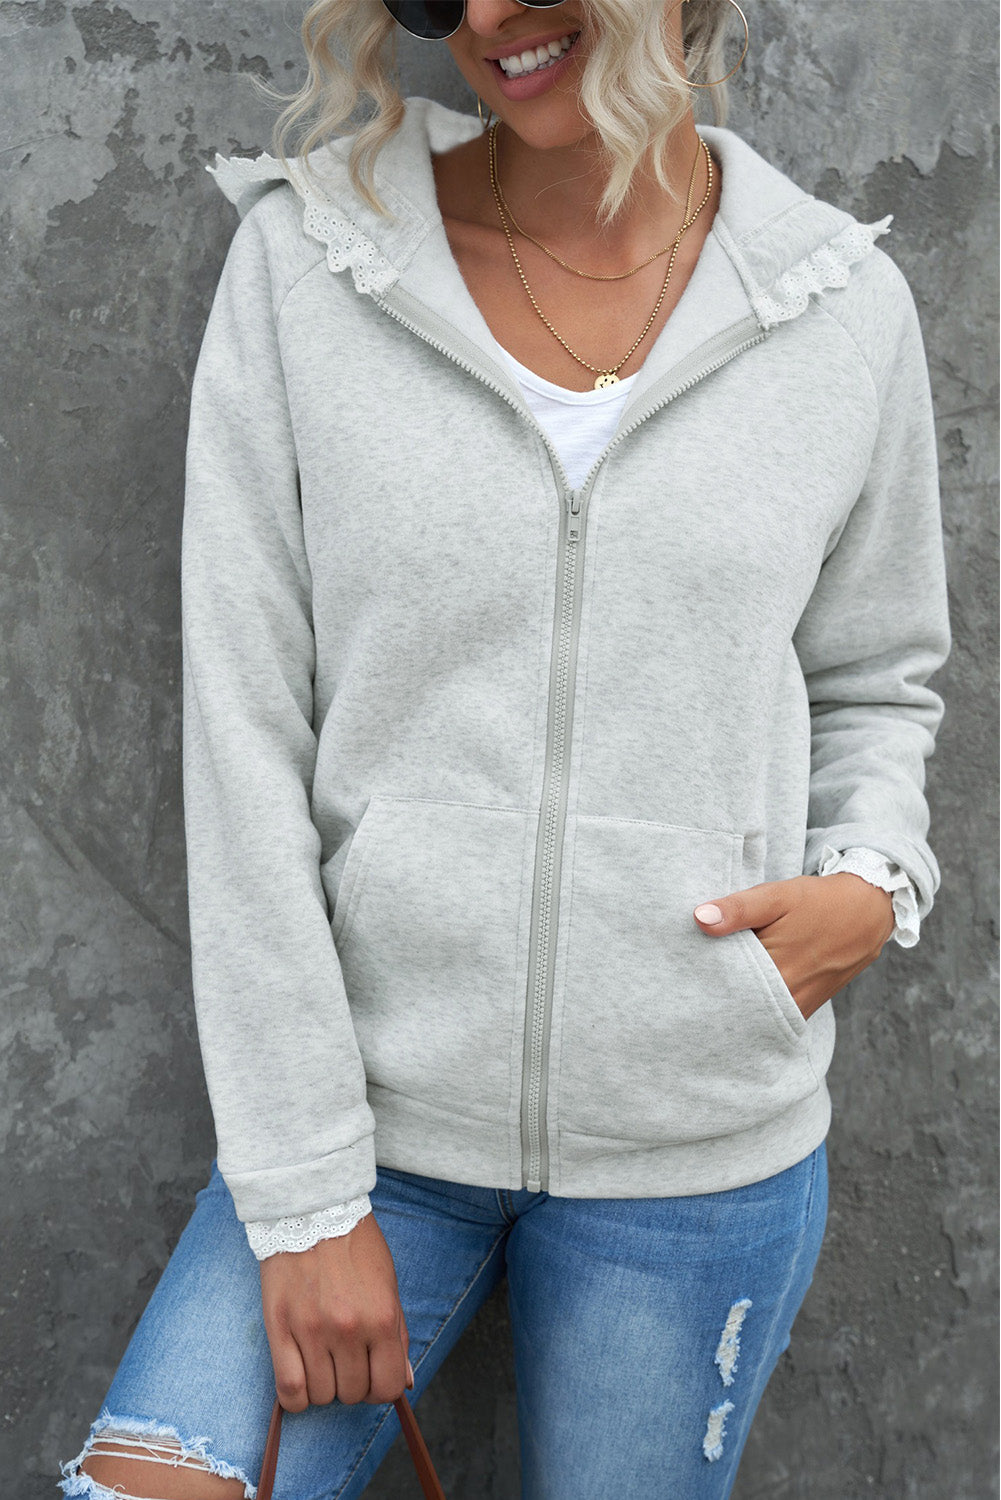 Sporty Chic Lace Trim Zip-Up Hooded Jacket